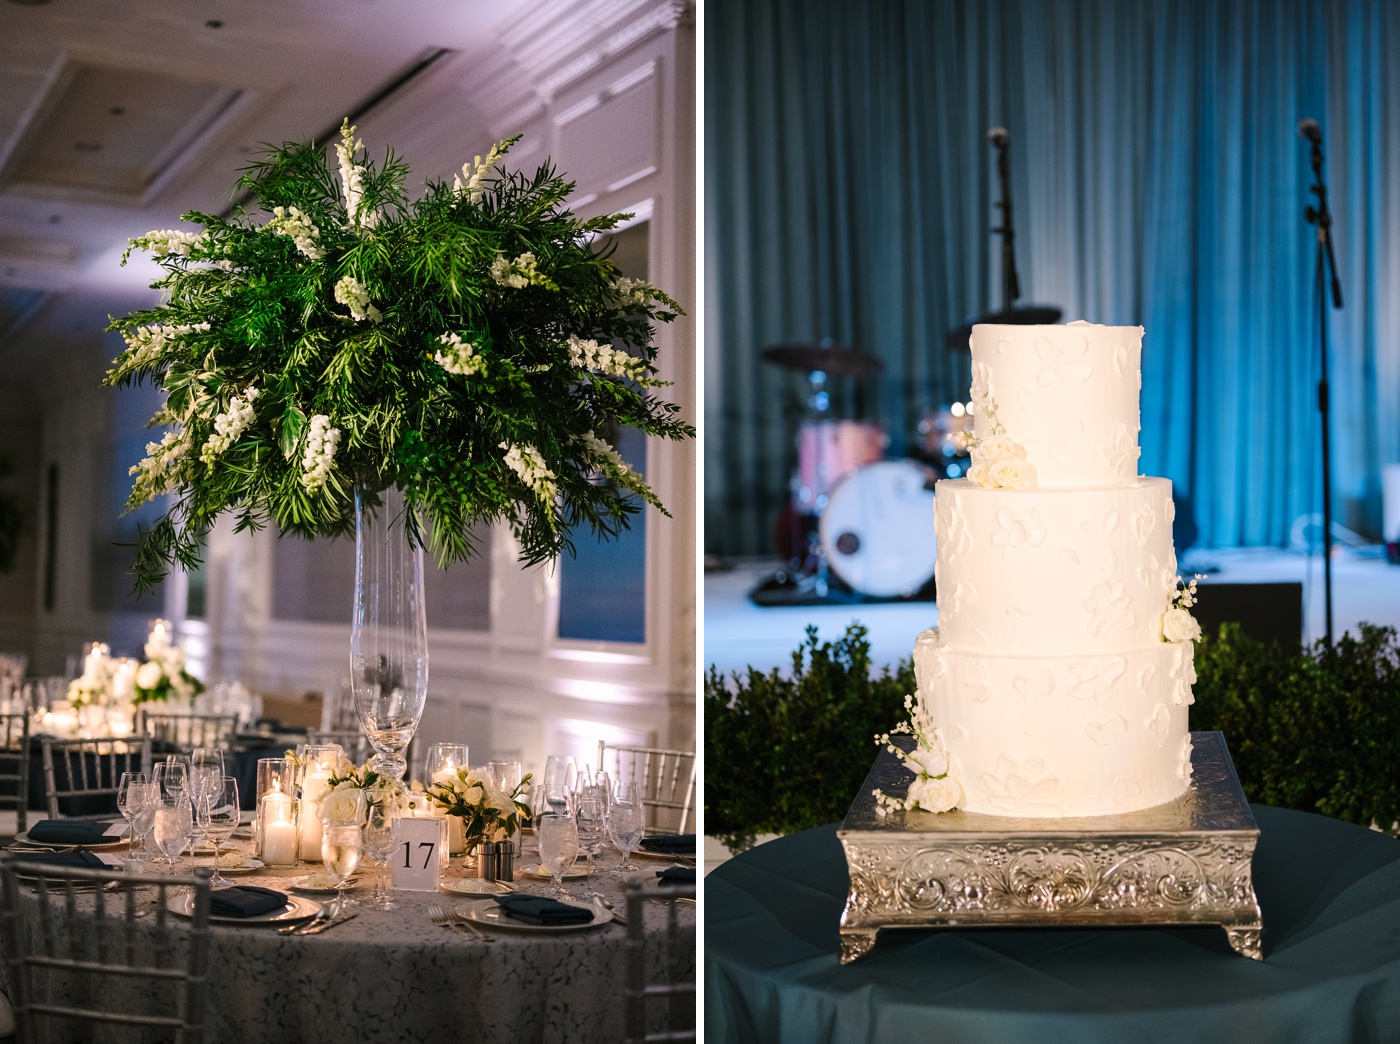 Tall wedding centerpiece filled with greenery and white delphinium